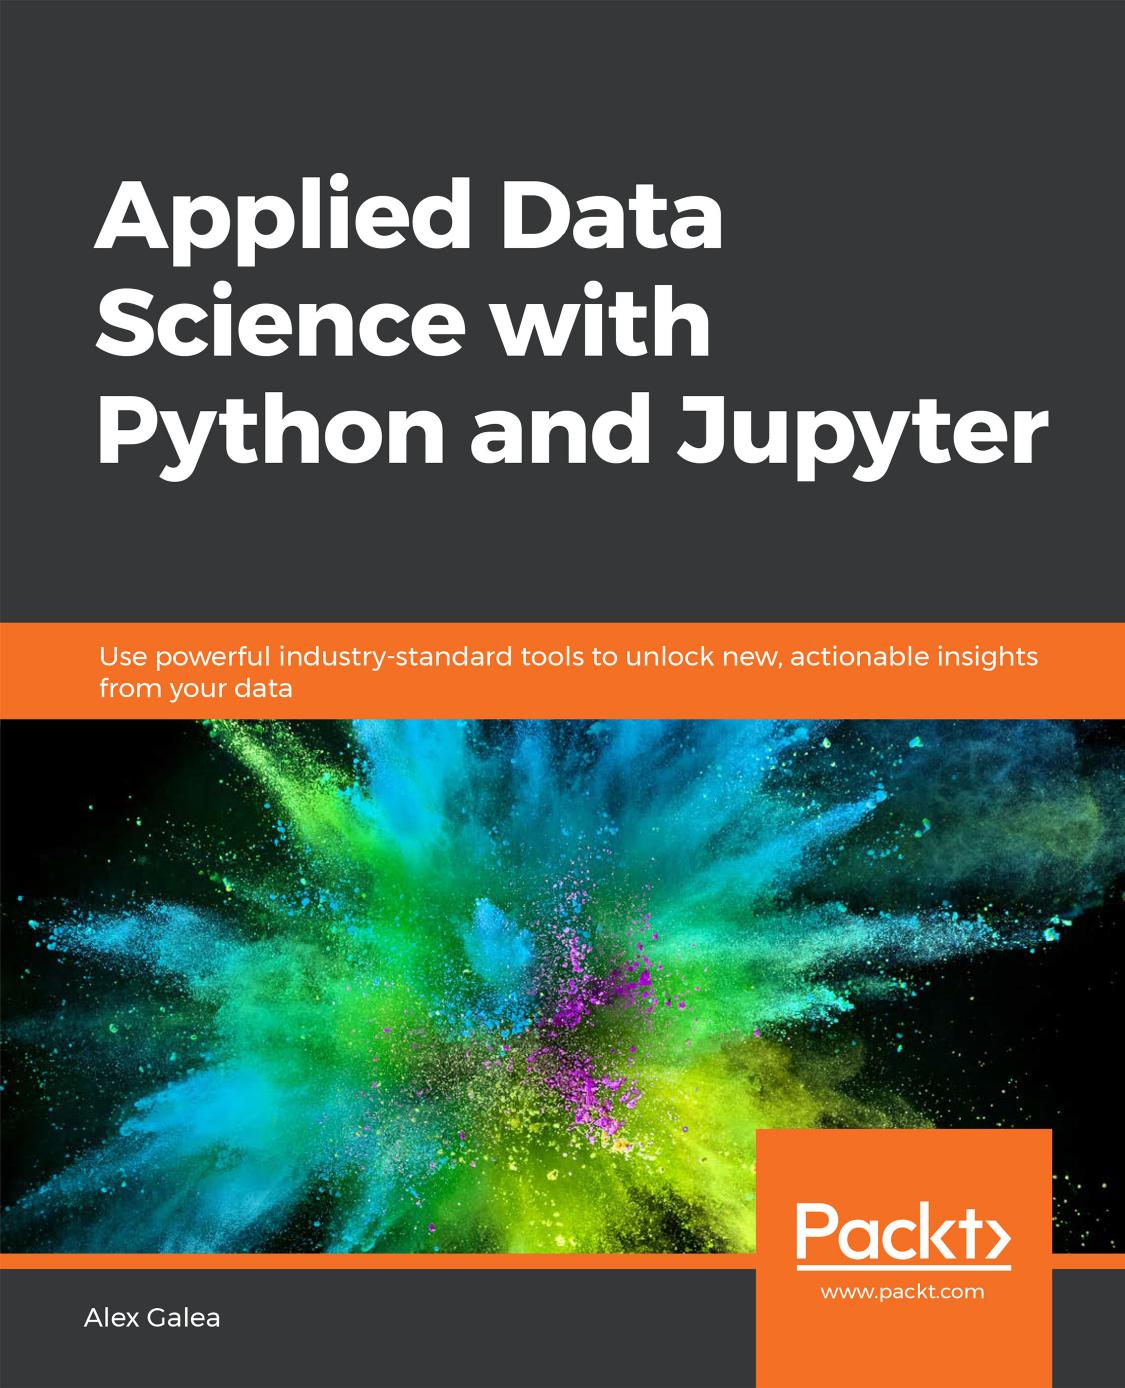 Applied Data Science with Python and Jupyter by Alex Galea